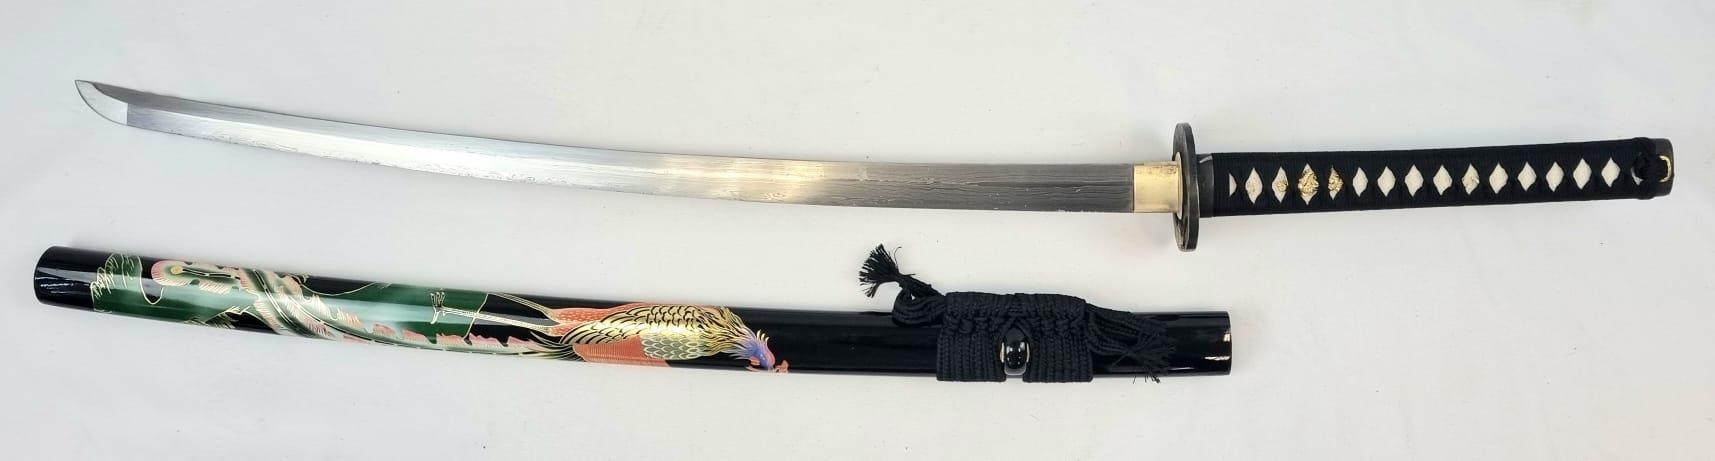 Excellent Condition Hand Forged Japanese Katana in Highly Decorated Wood Saya (Scabbard) Brass Tsuba - Image 2 of 5